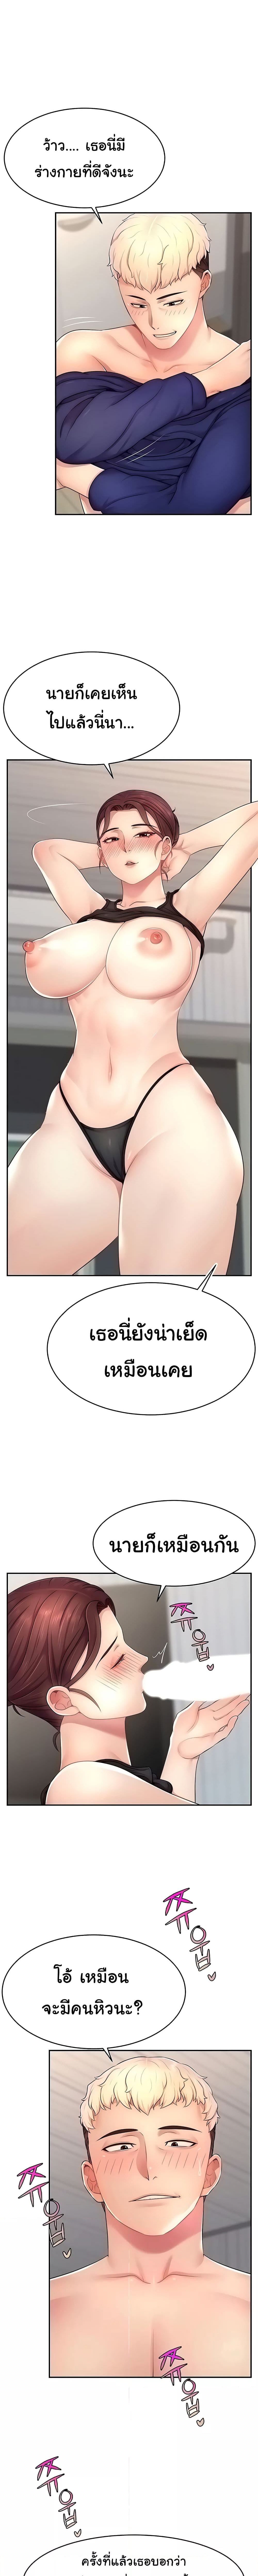 Making Friends With Streamers by Hacking! ตอนที่ 13 ภาพ 9